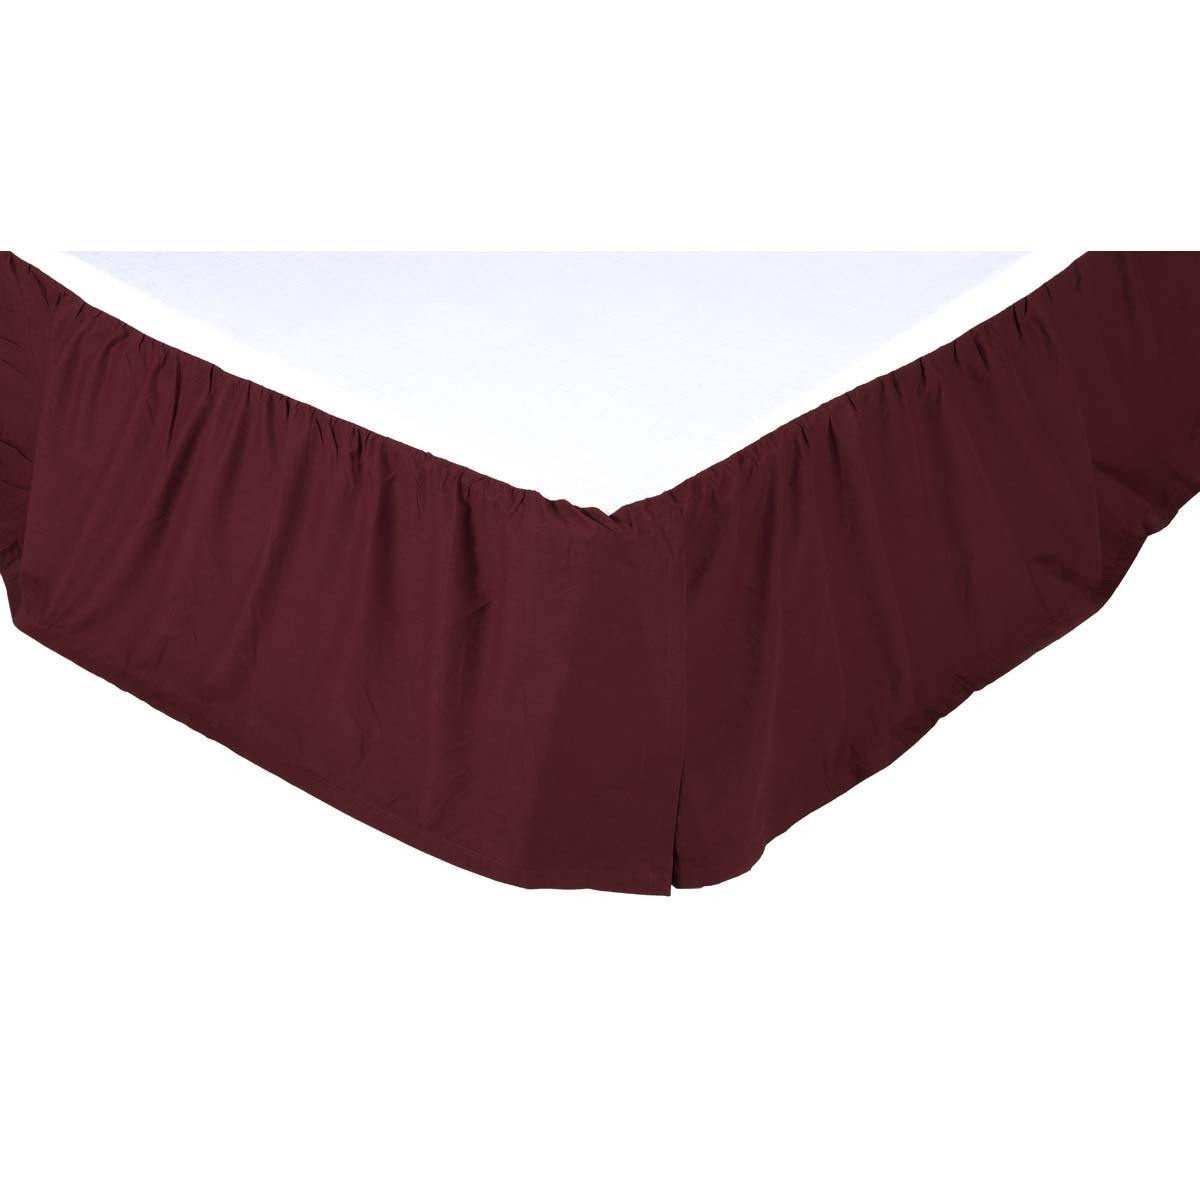 Solid Burgundy Bed Skirts VHC Brands - The Fox Decor